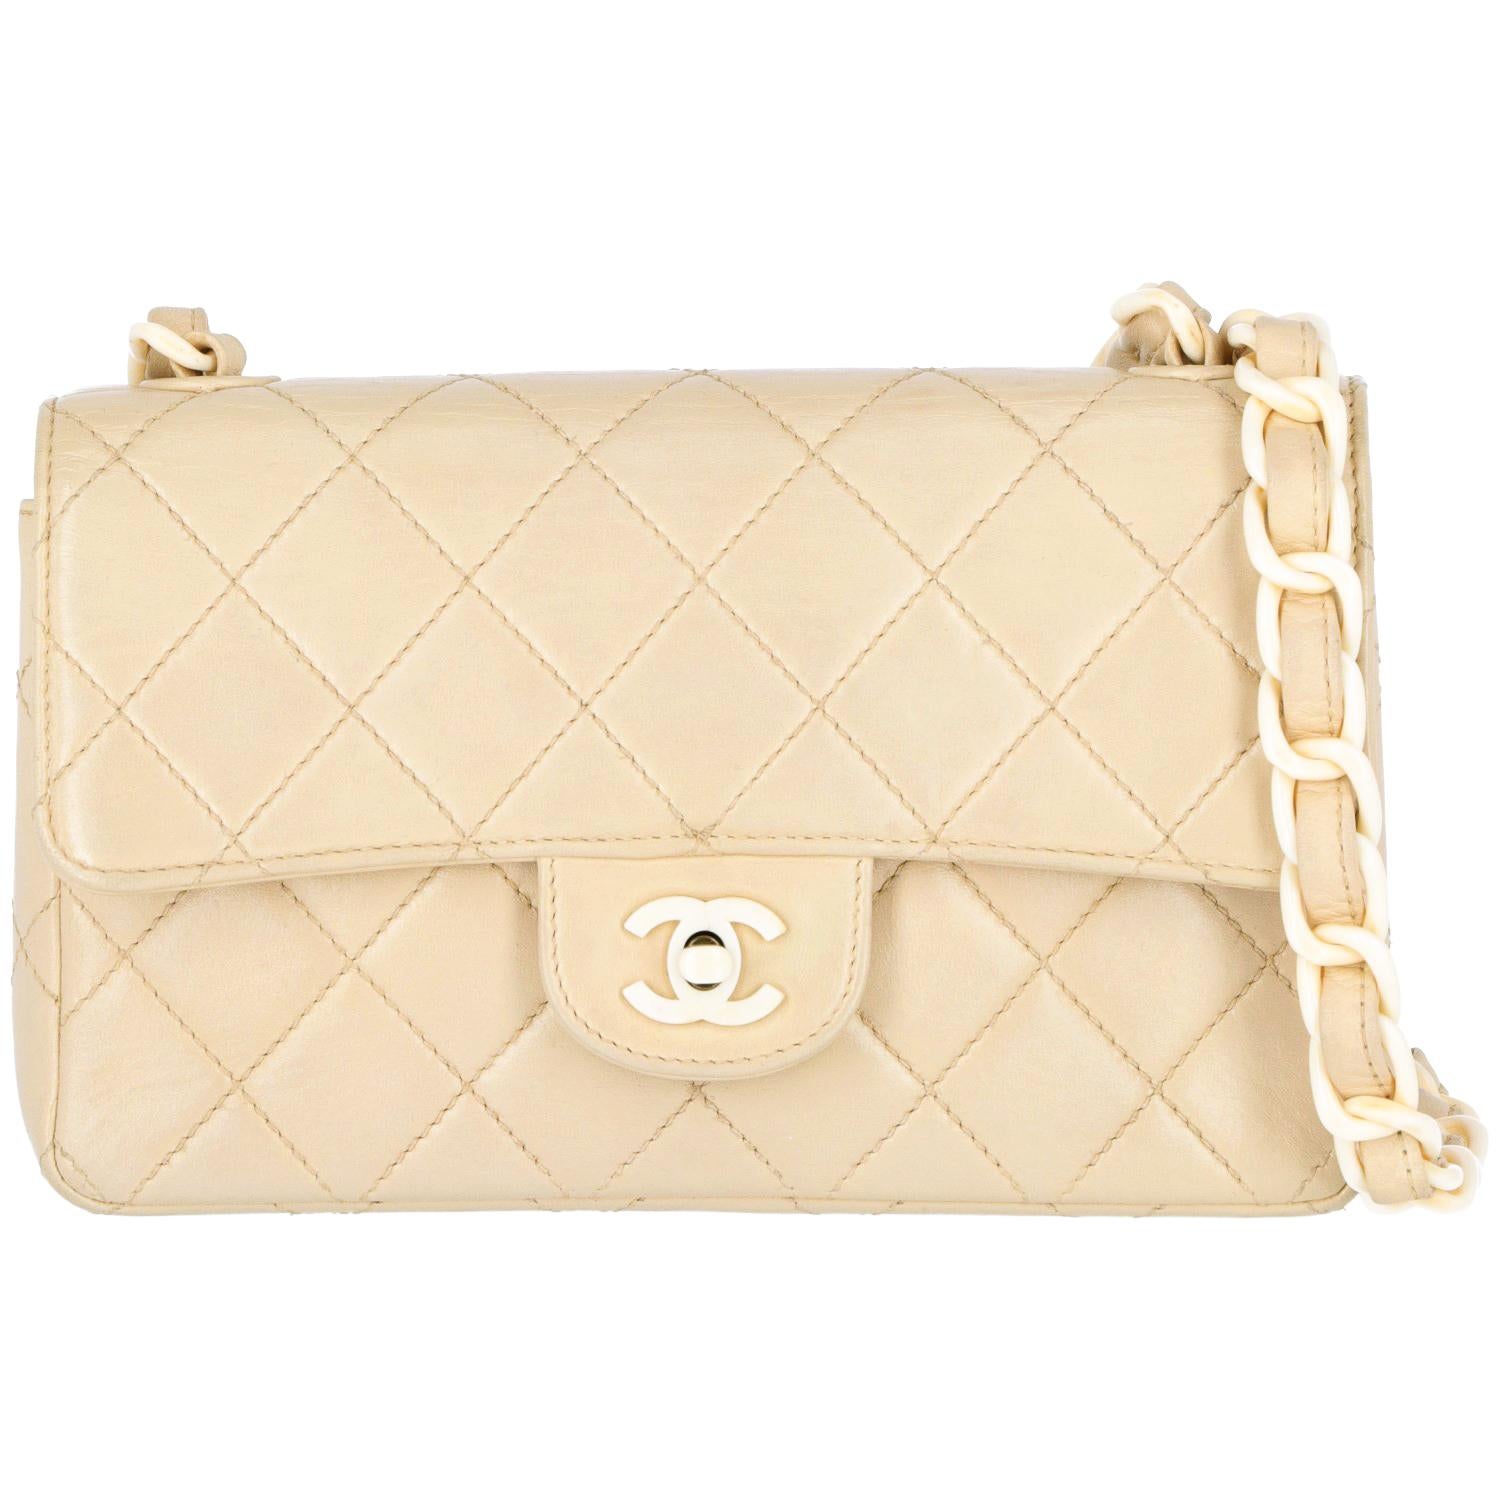 1990s Chanel beige leather bag 